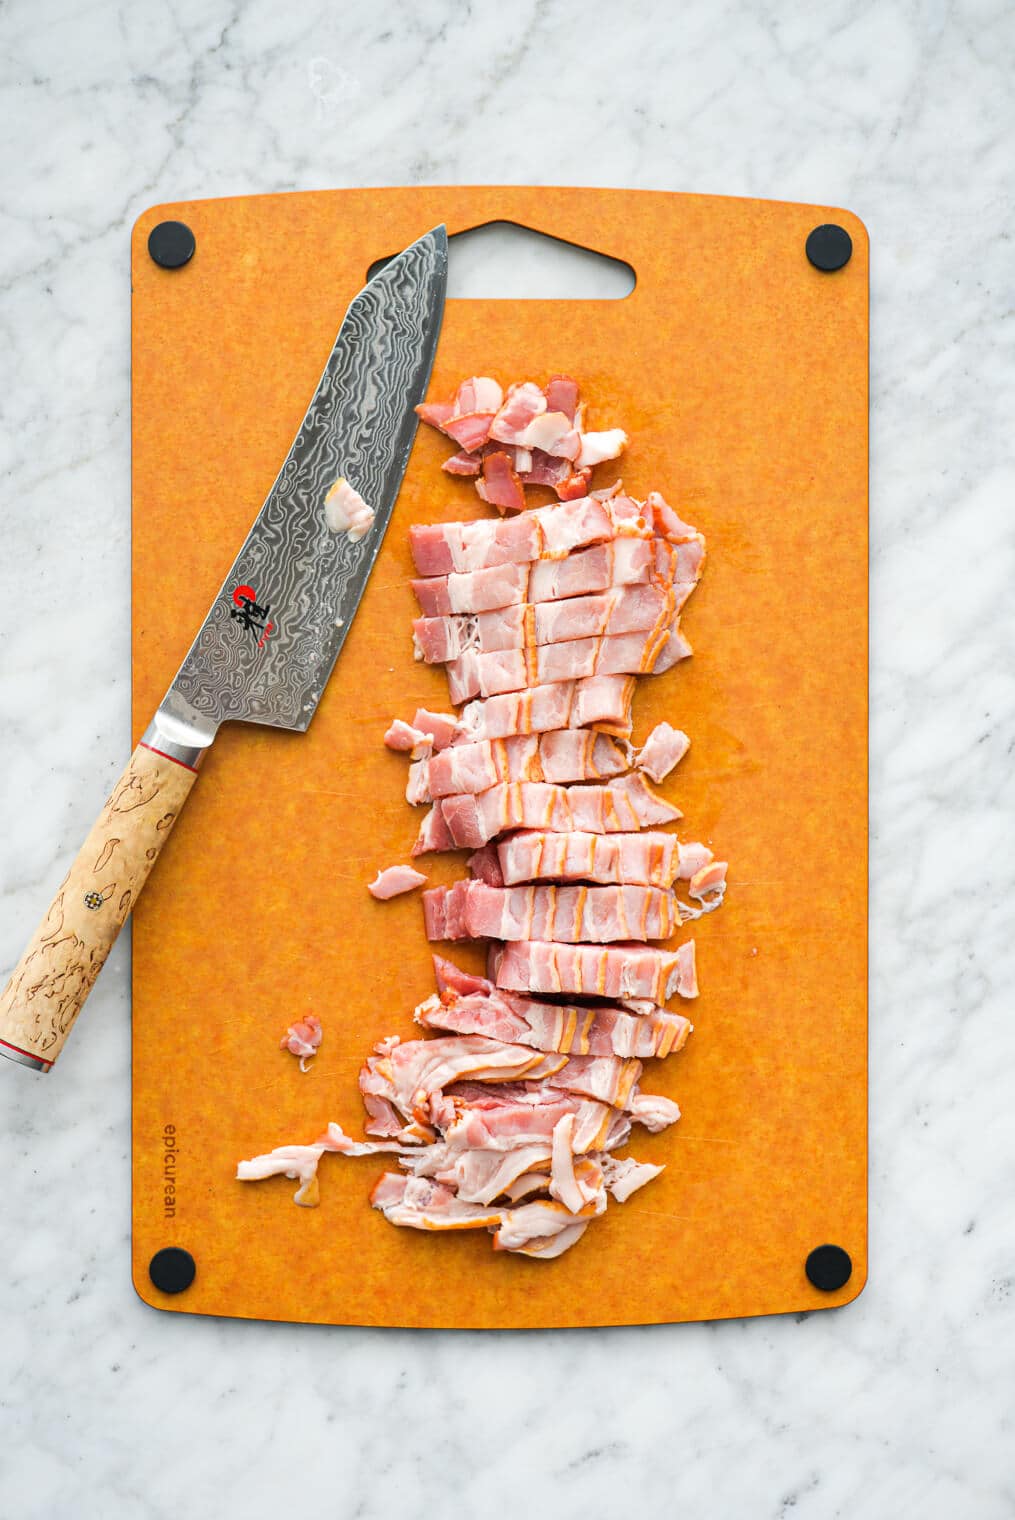 chopped bacon on a cutting board next to a large knife